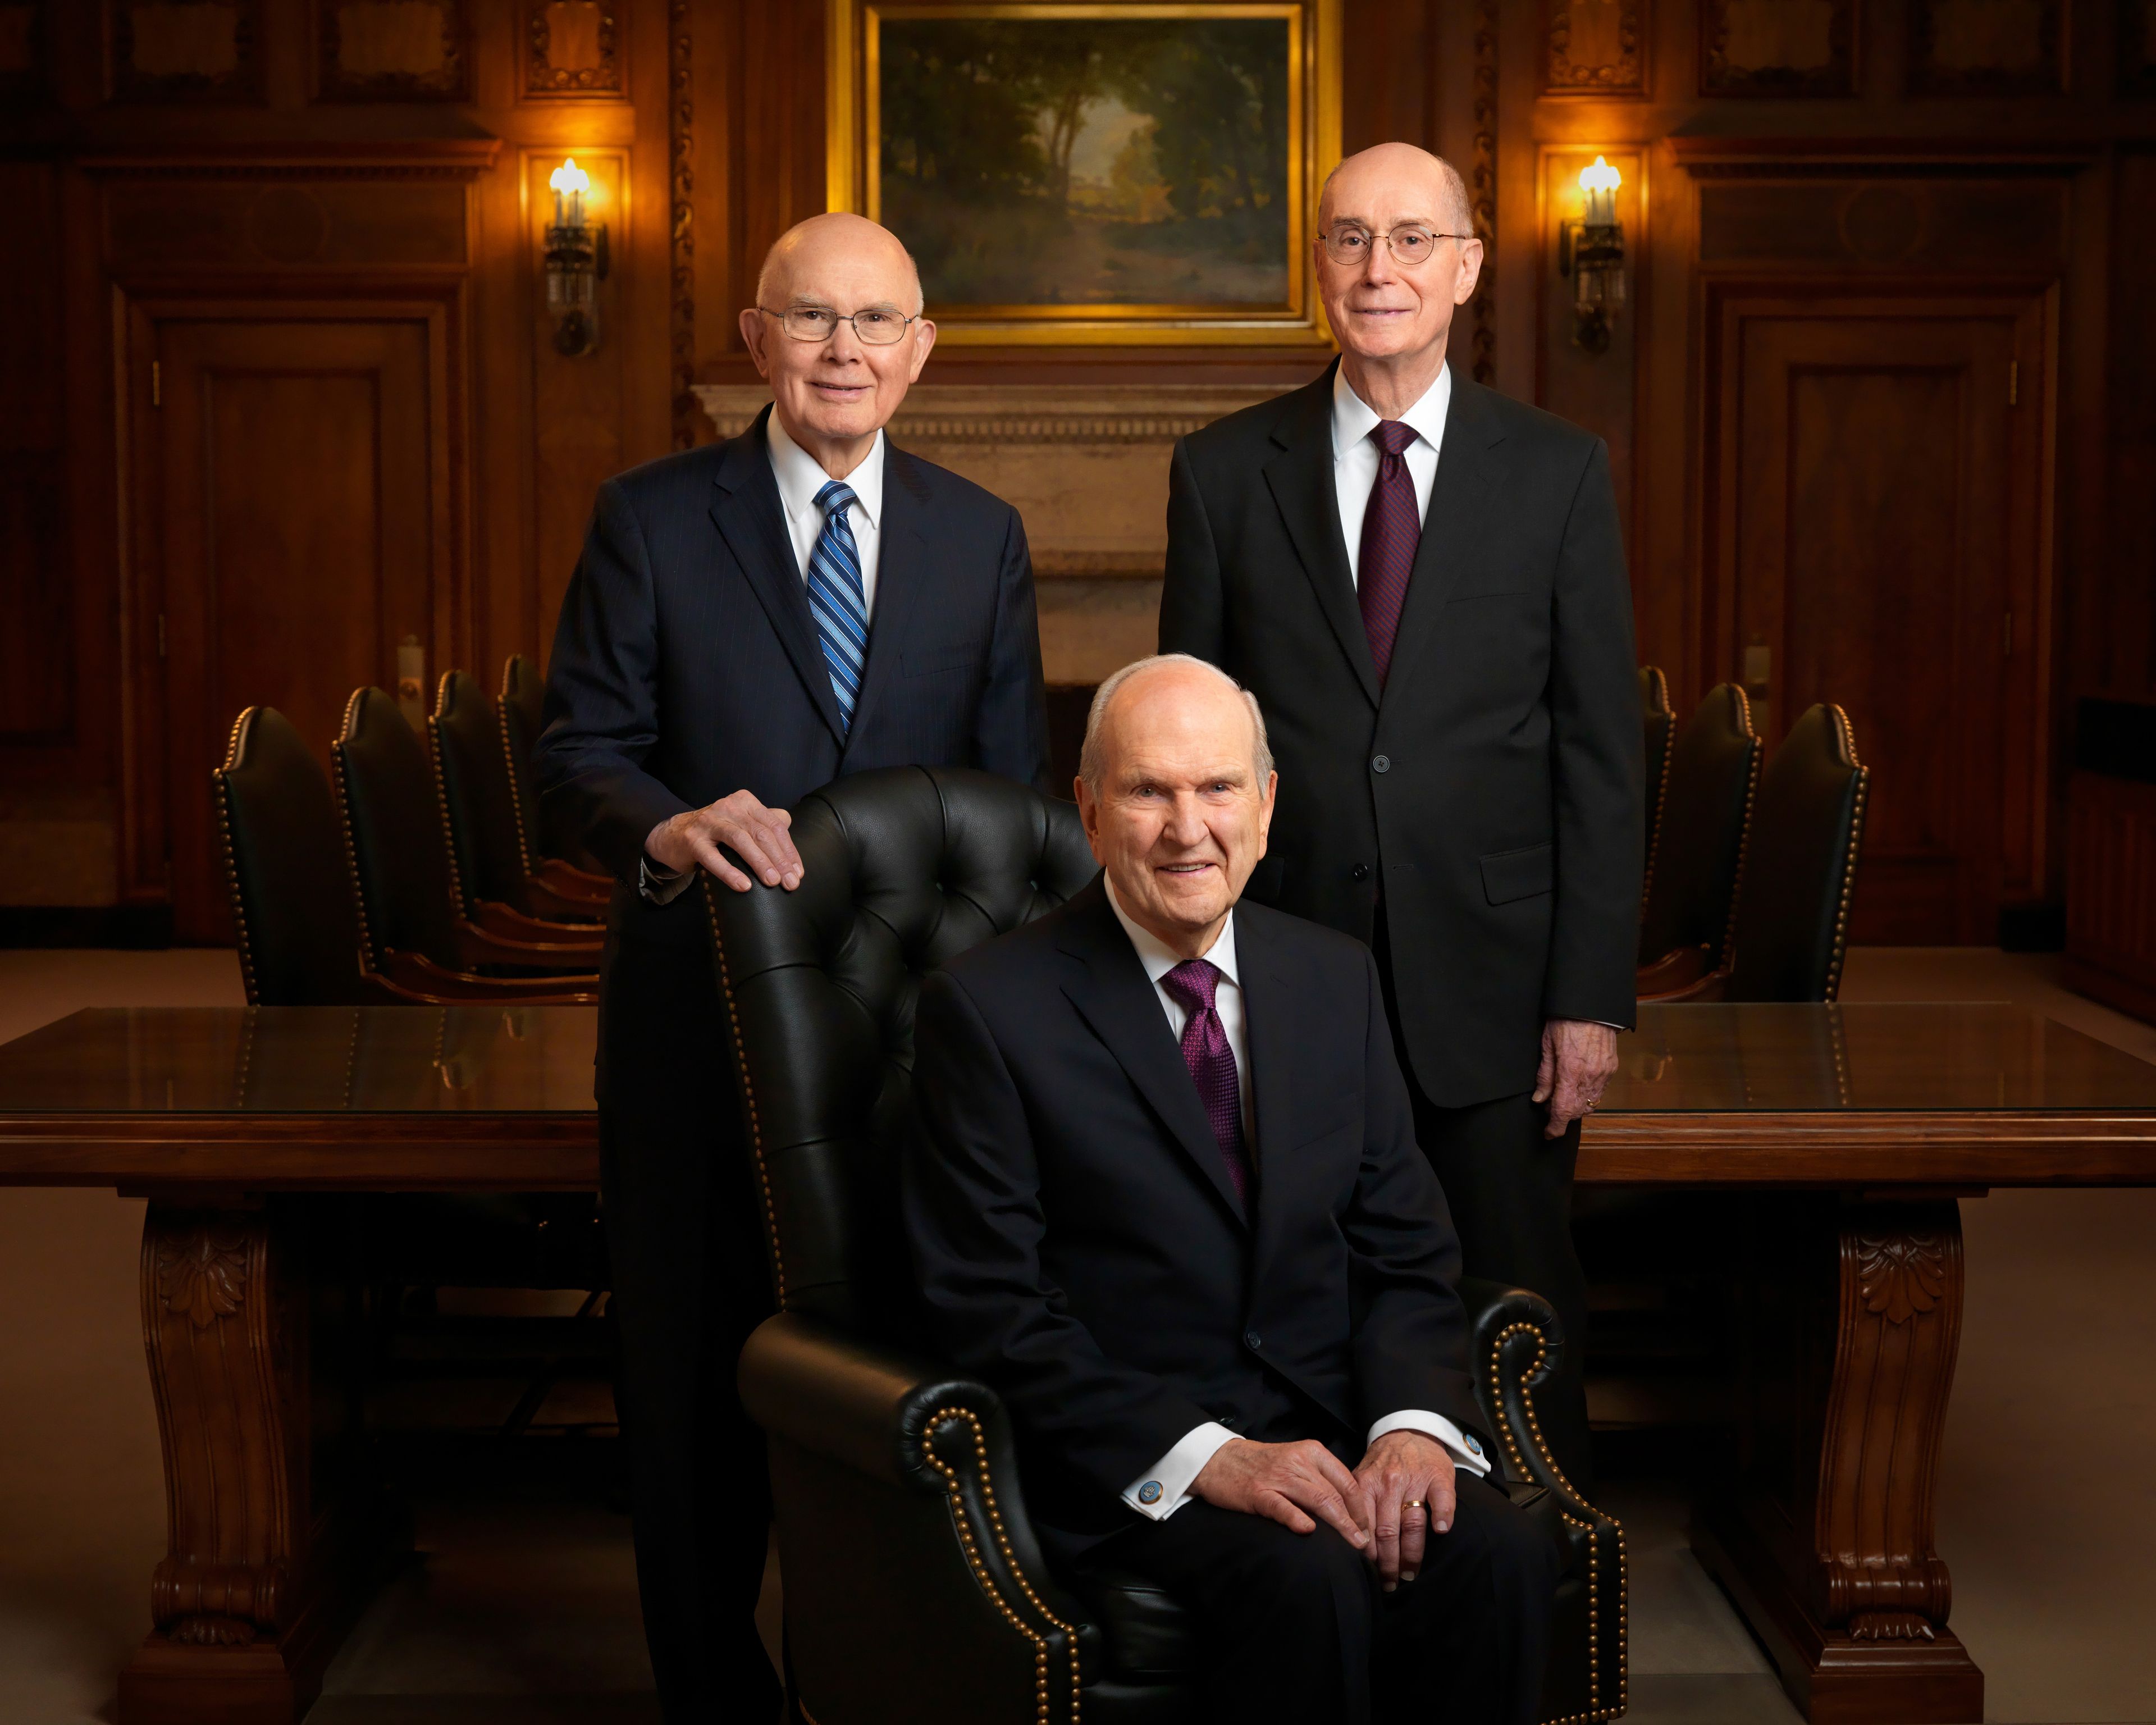 The Official Portrait of the First Presidency.